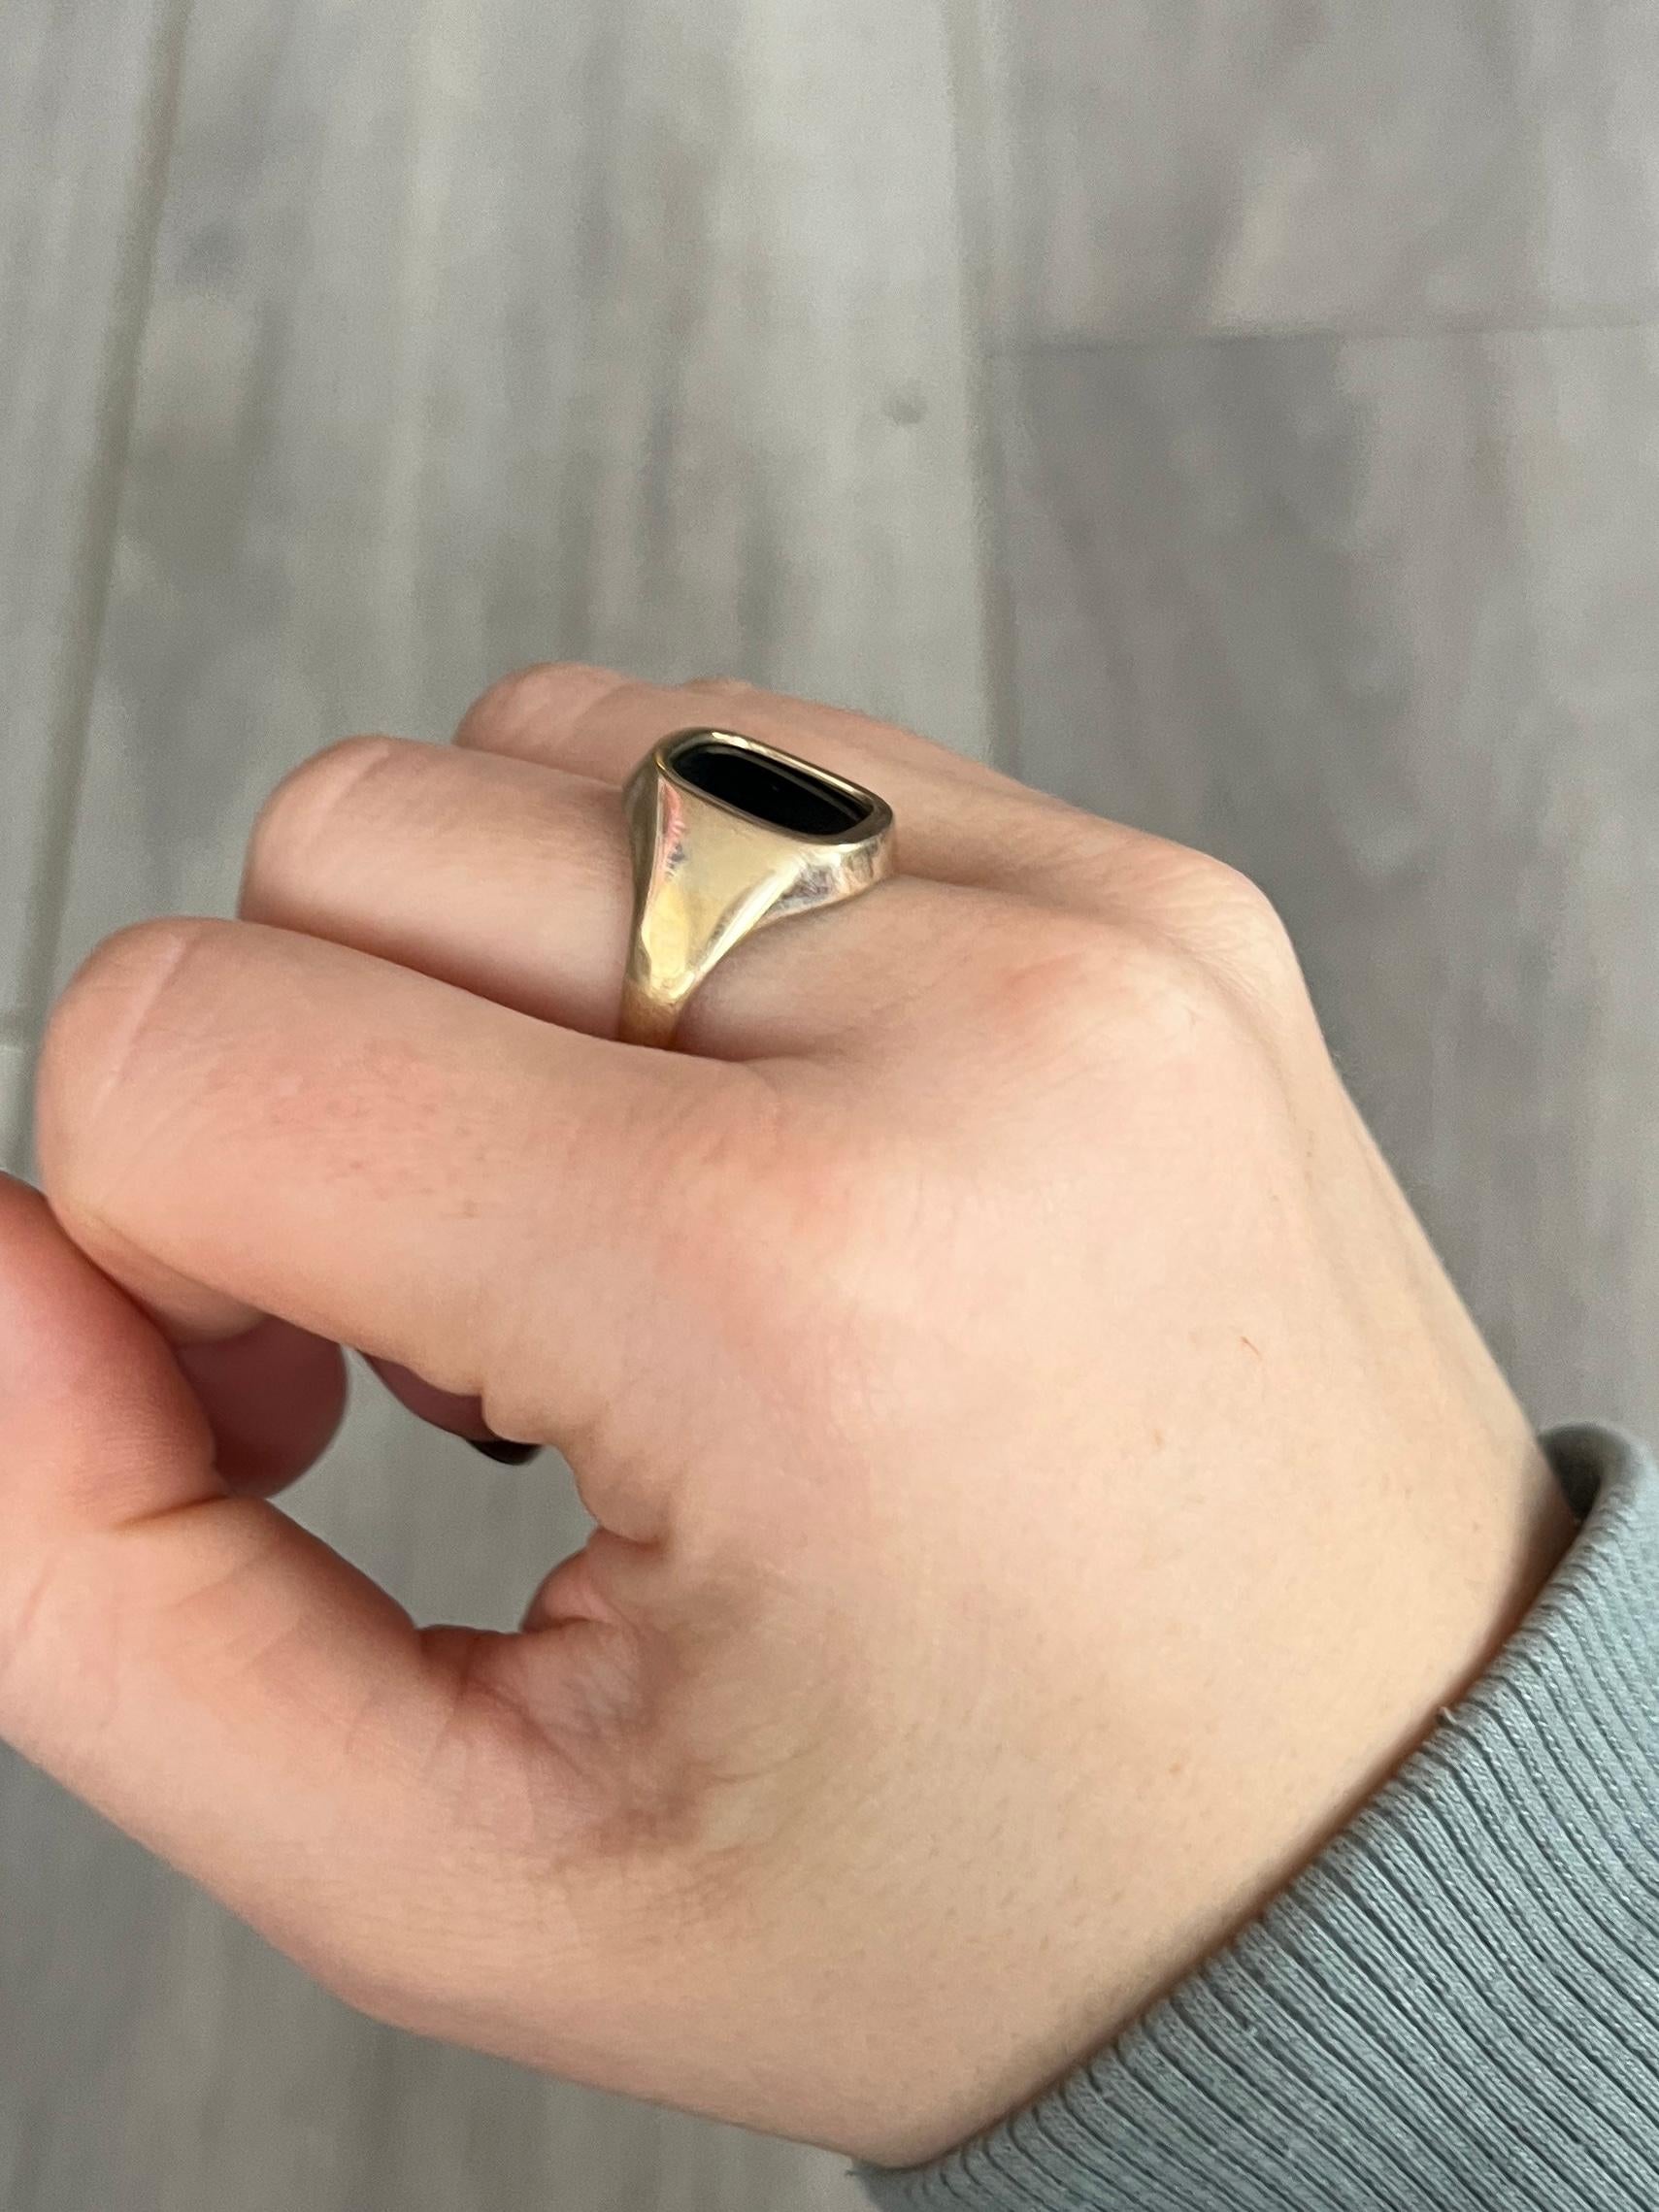 The onyx in this signet ring is in lovely condition and it so glossy! The stone is set within the 9ct gold  band. Fully hallmarked London 1987.

Ring Size: S or 9 
Stone Dimensions: 11x10mm 

Weight: 2.6g